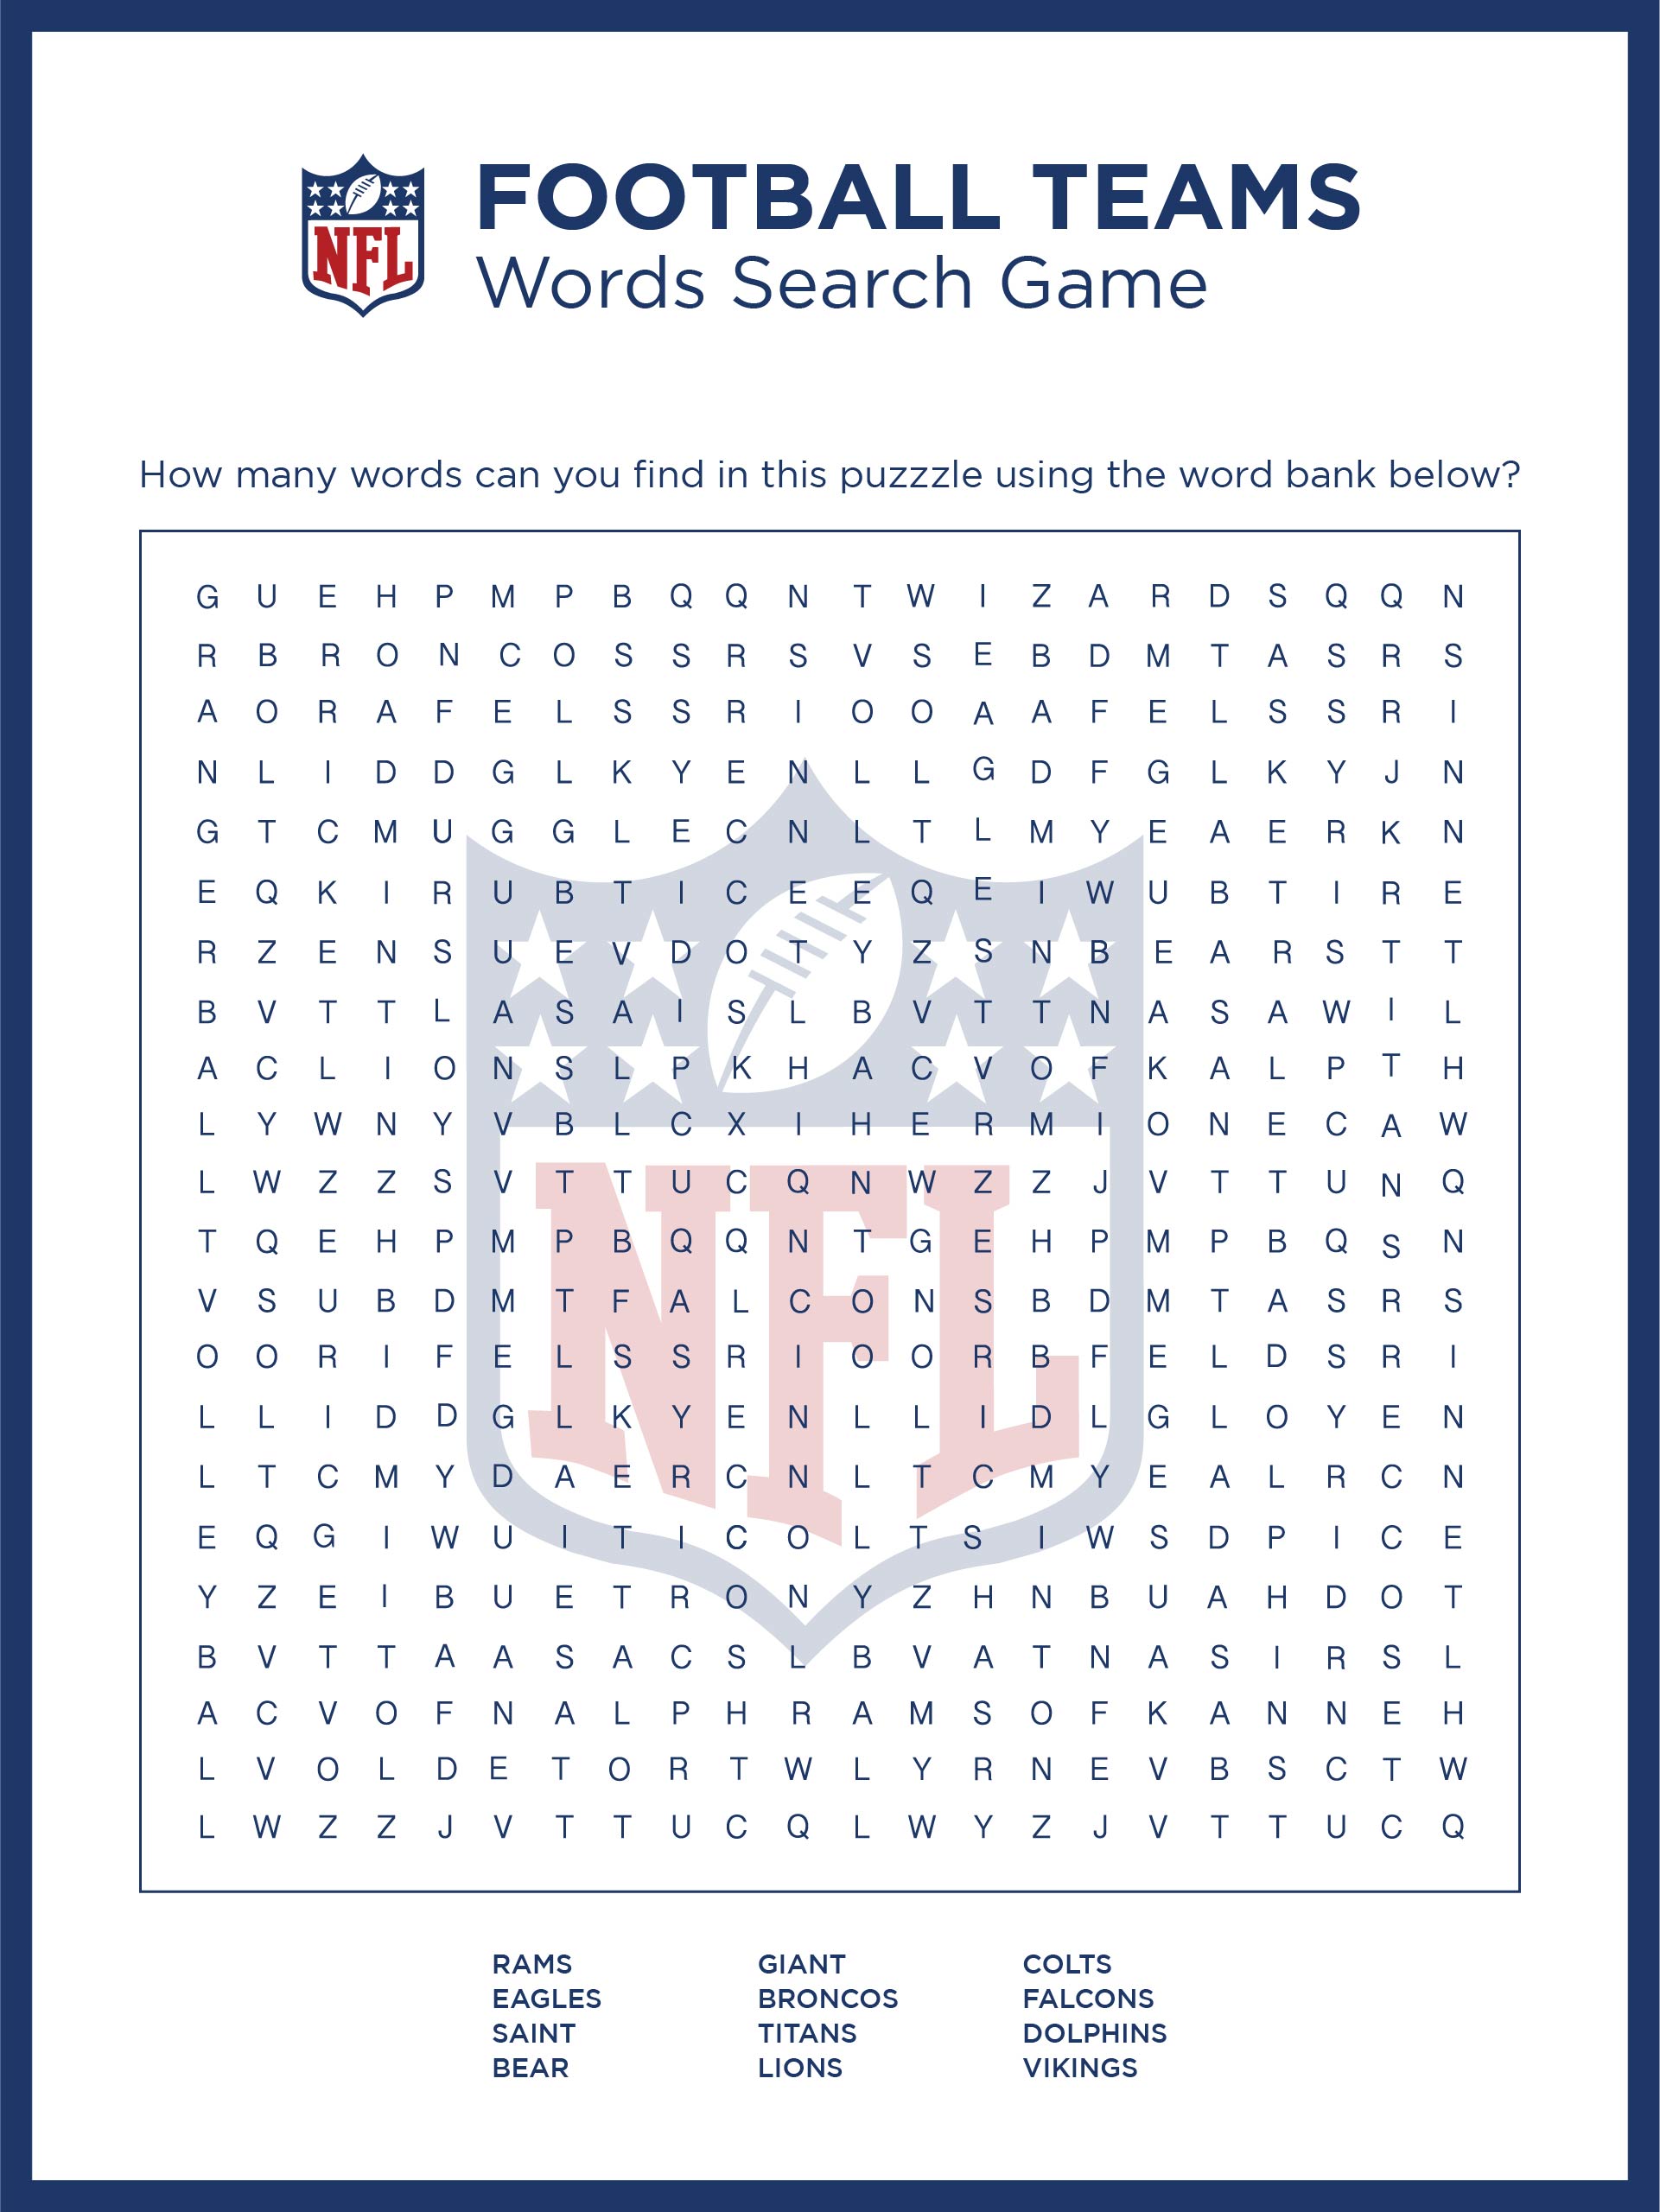 nfl word search activity shelter - 6 best images of nfl football word ...